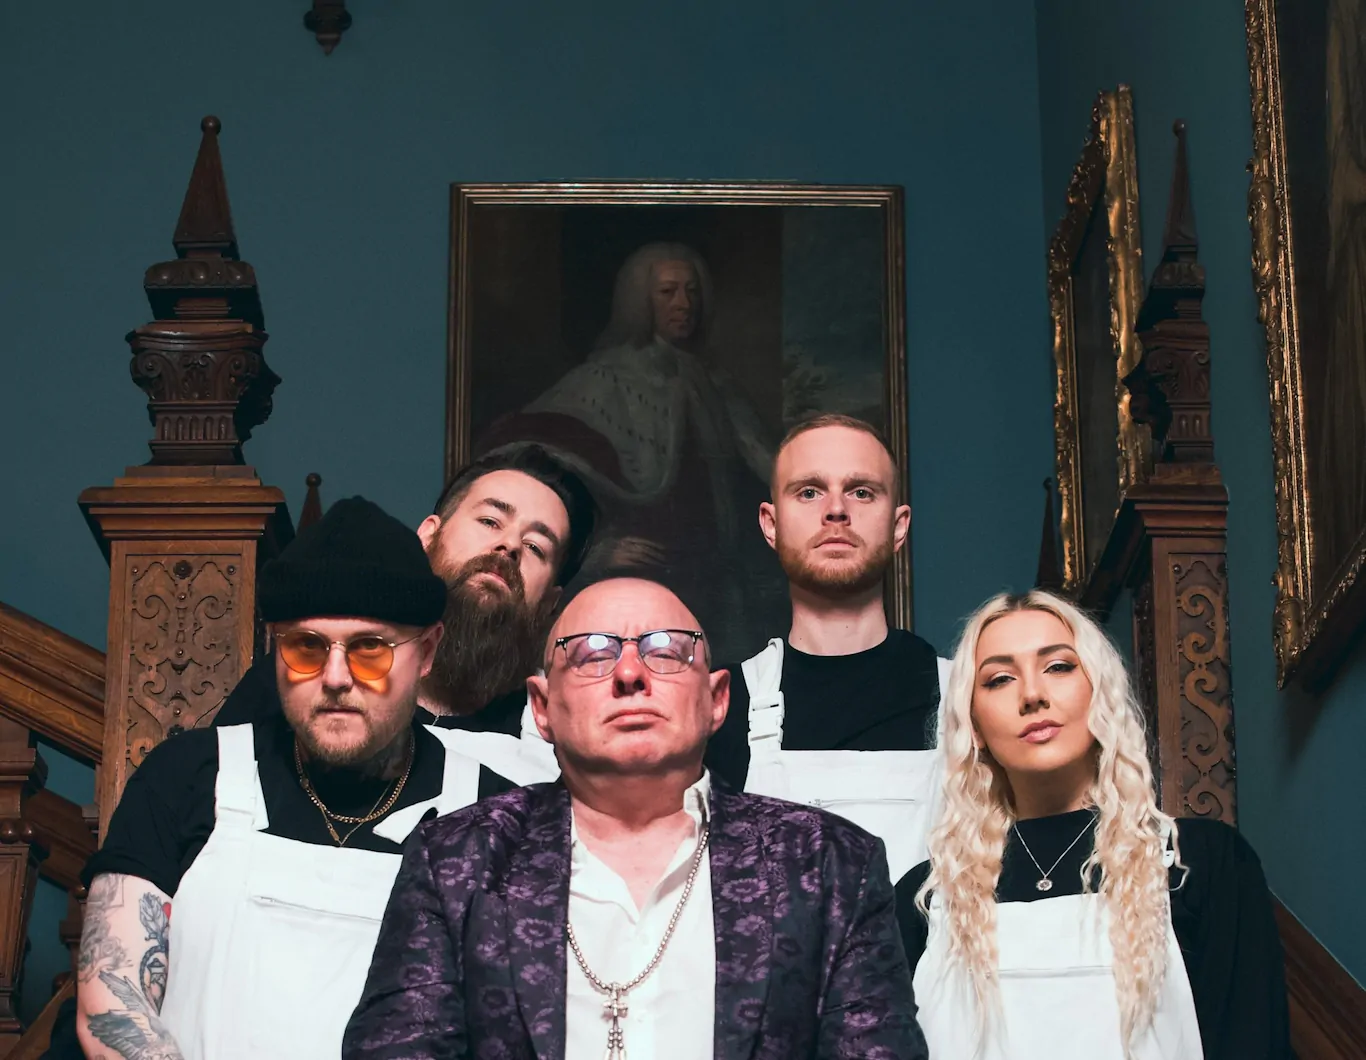 THE LOTTERY WINNERS release new video & single ‘Money’ featuring Shaun Ryder